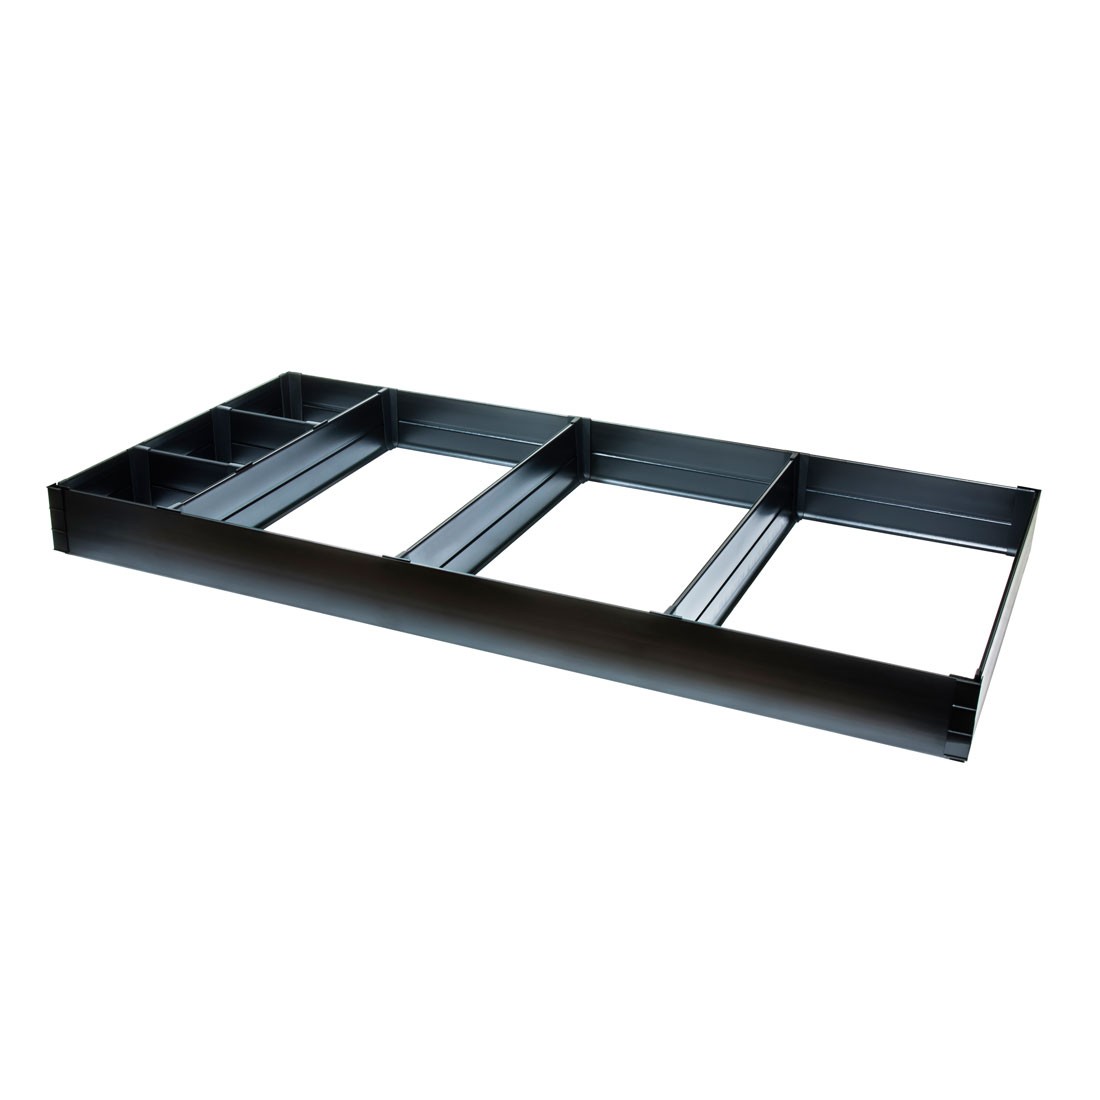 2.9” Drawer Divider II – 6 Compartment